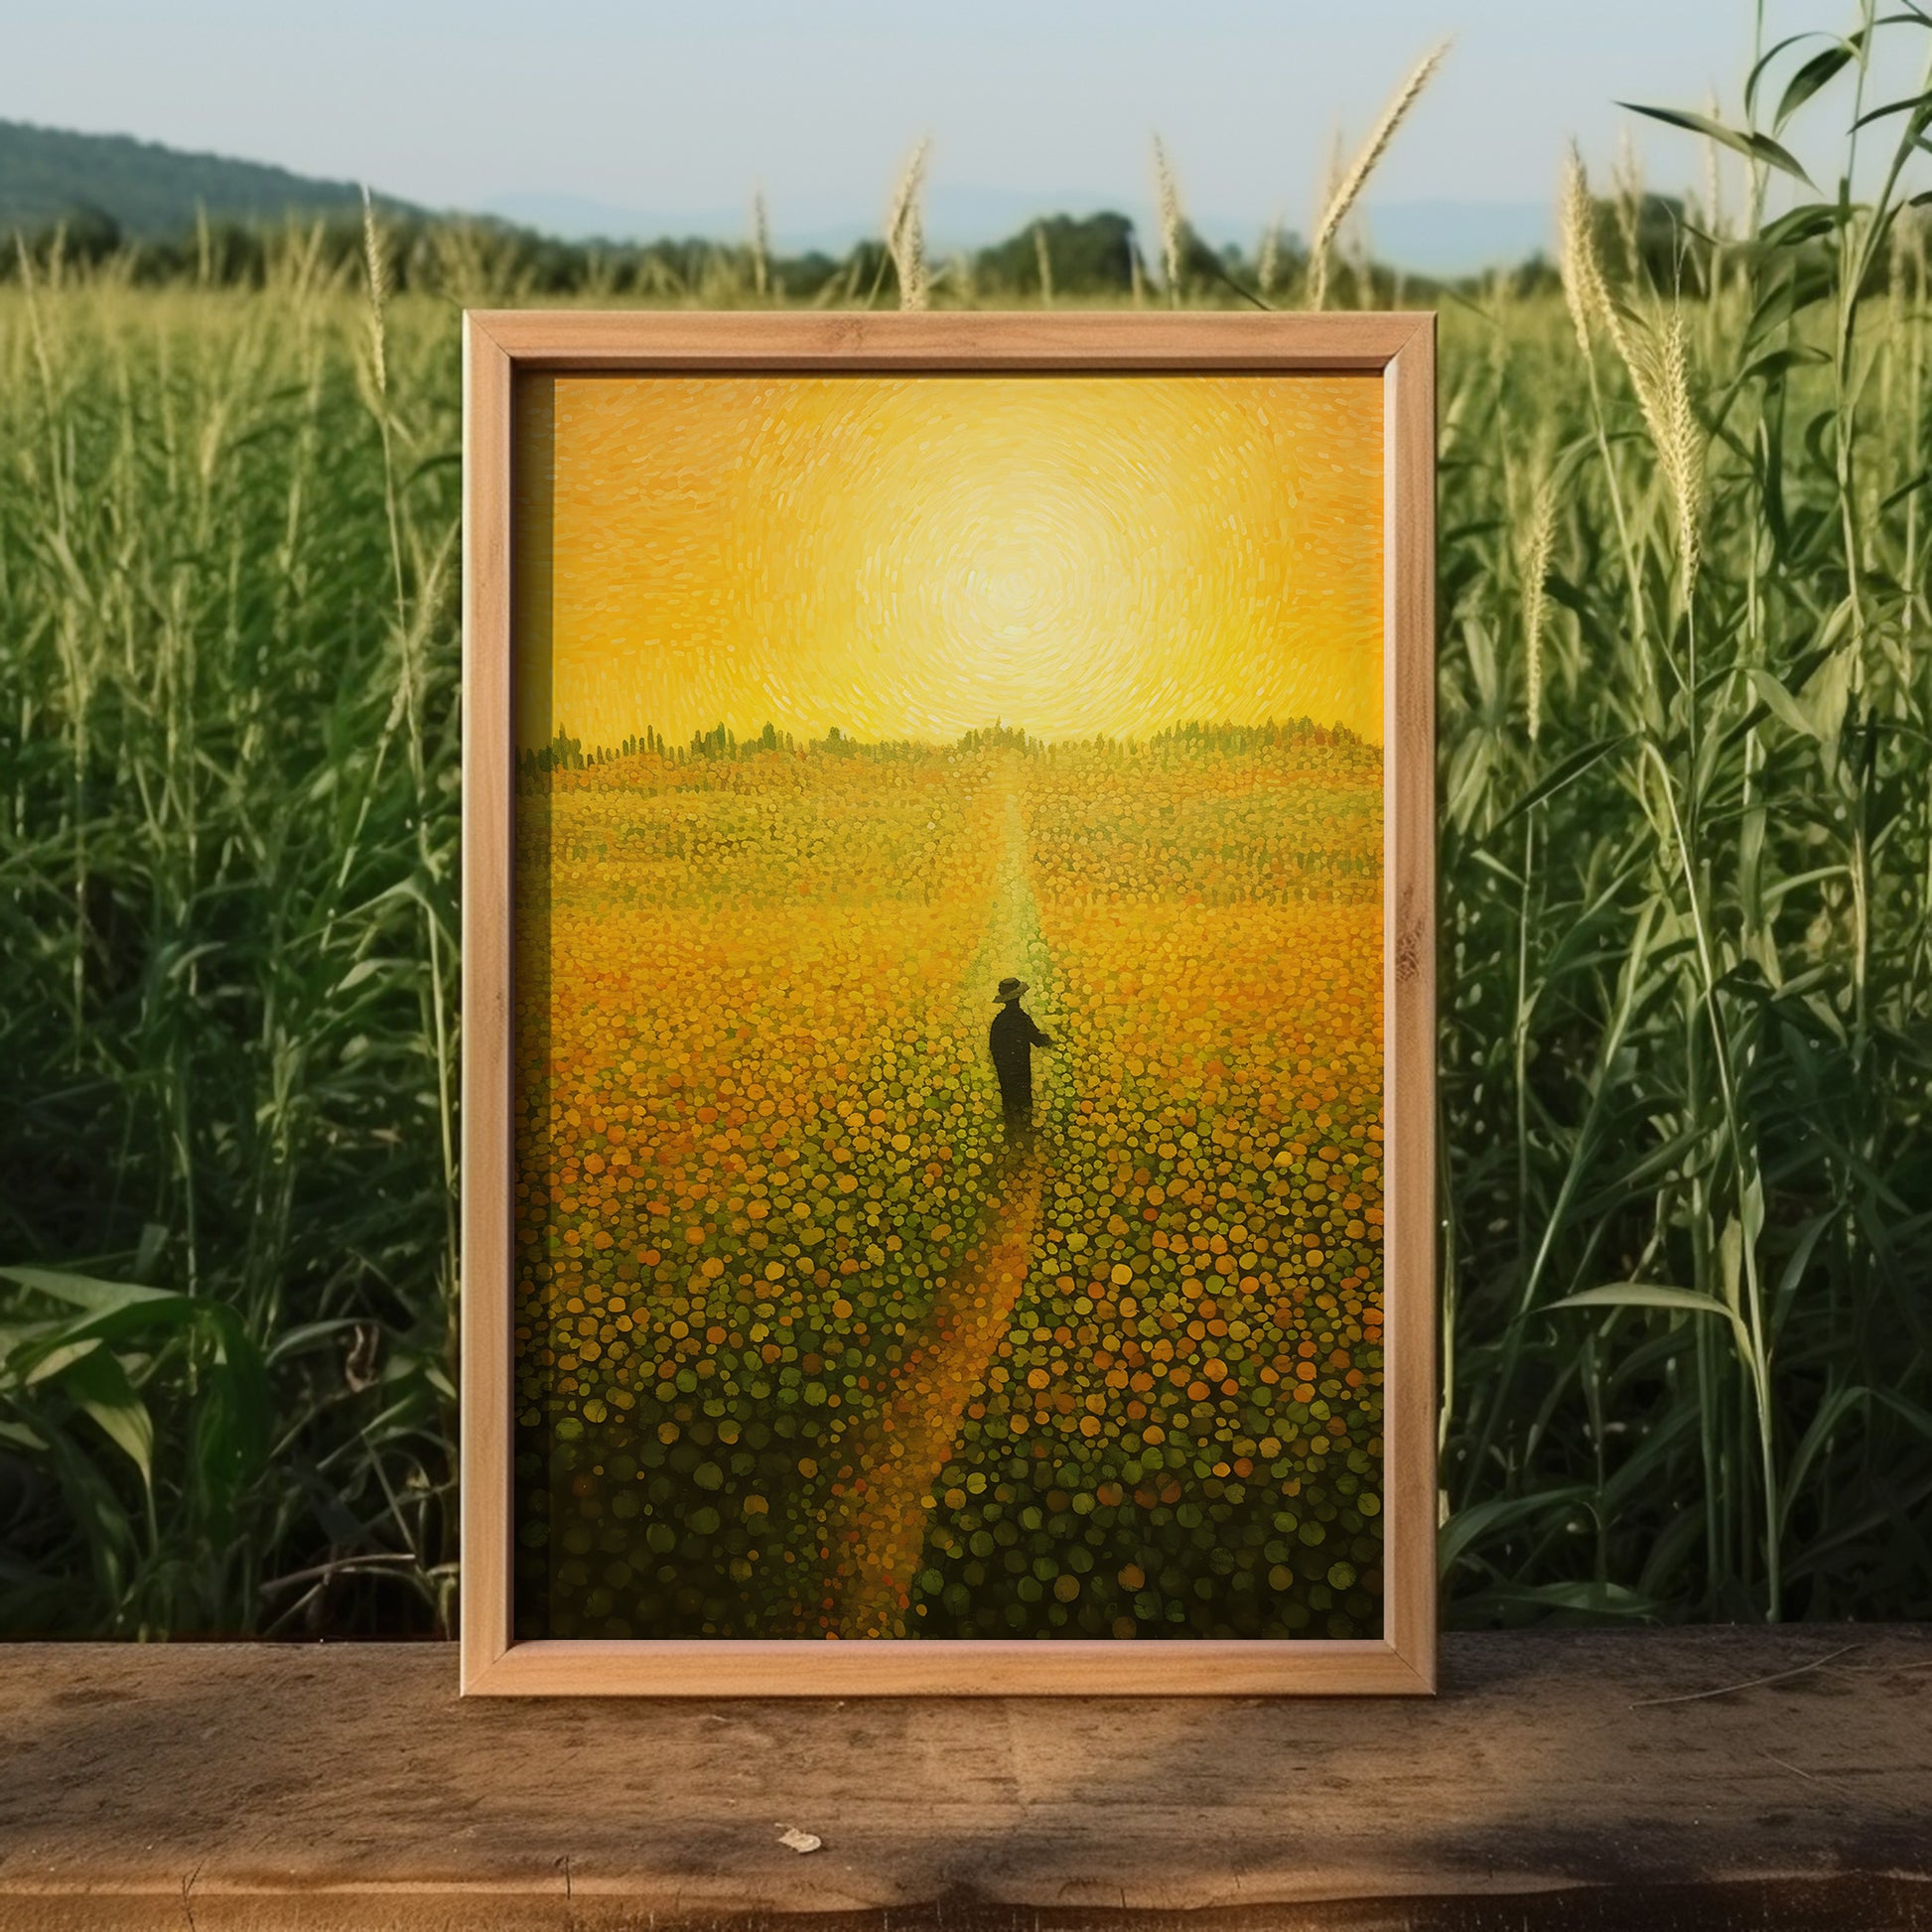 A framed painting of a person standing in a sunlit field displayed outdoors.